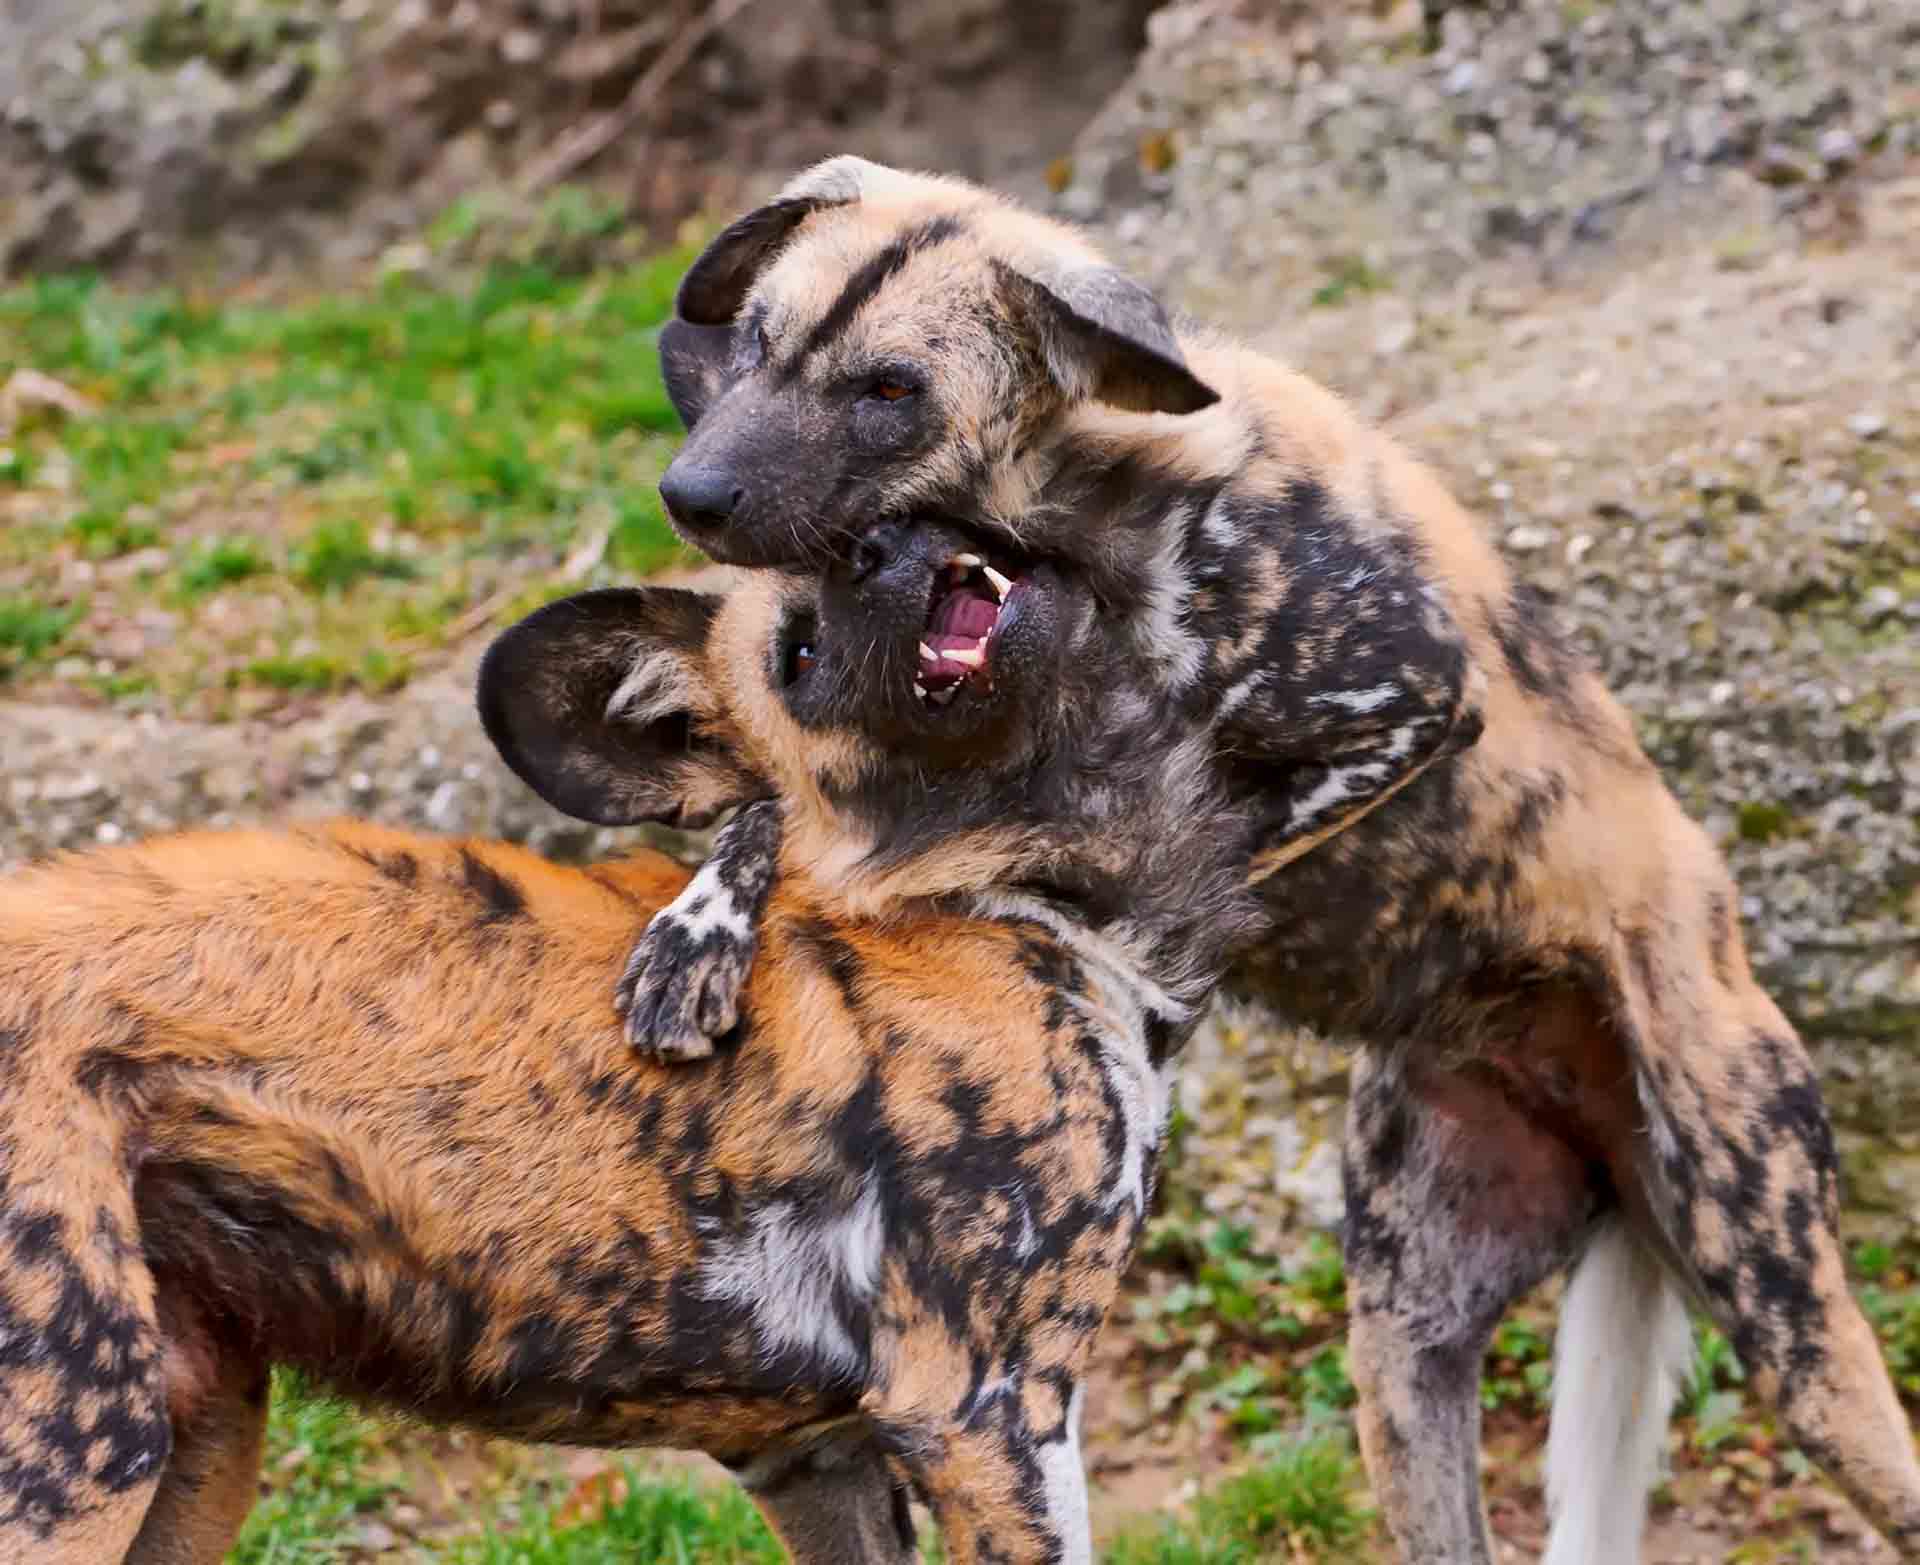 African Wild Dogs Latest HD Wallpaper Free Download. New HD